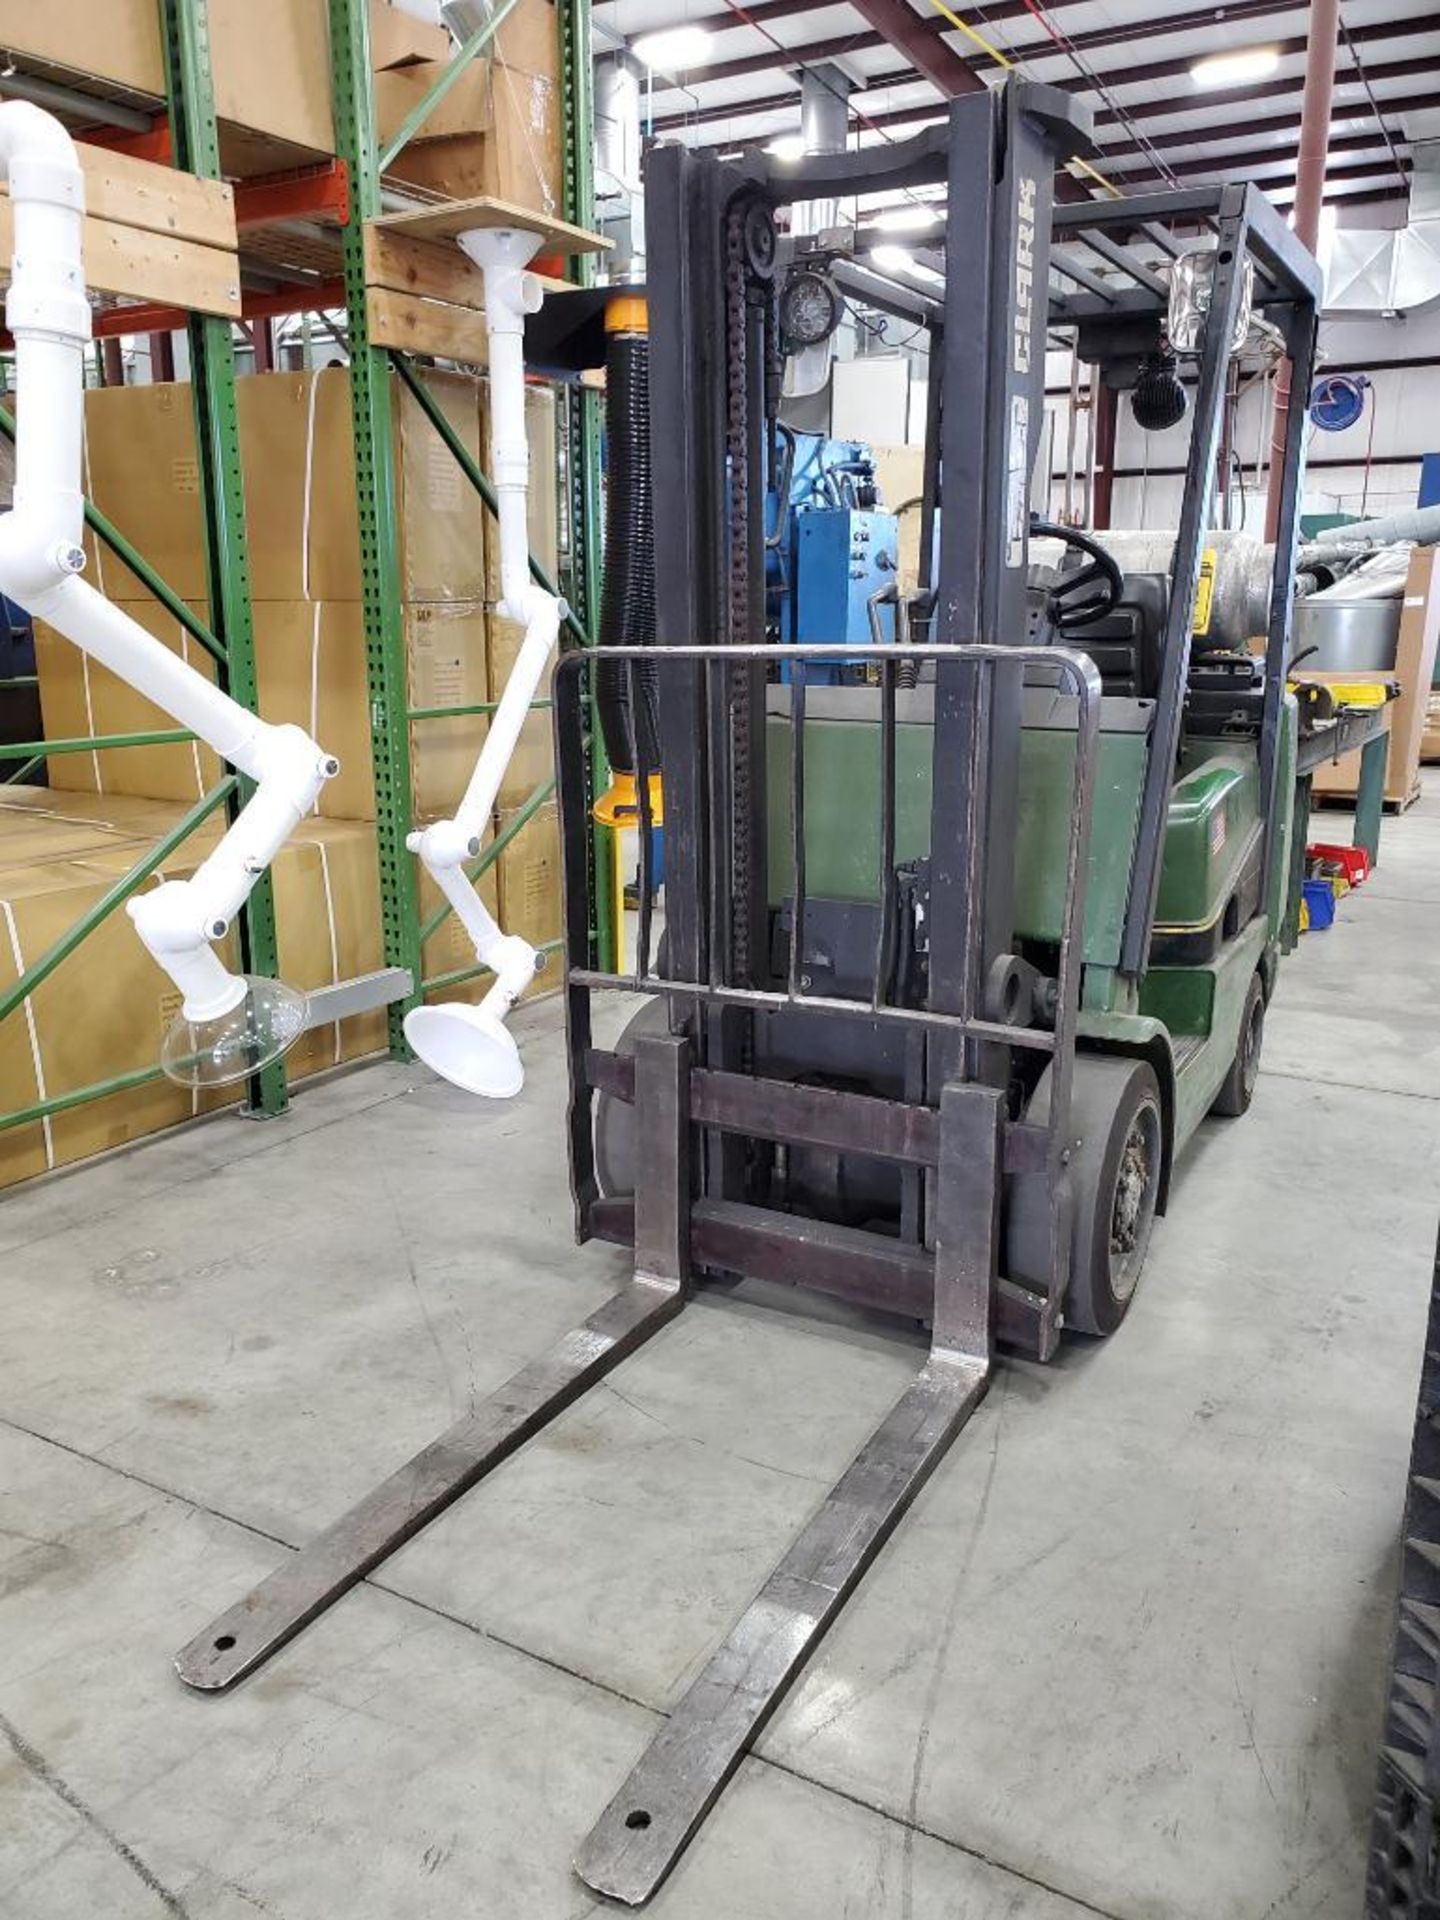 Clark 4,000 LB. Forklift, Model CGC20, S/N C365l-0052-9464FB, 130" Lift Height, 82-1/2" 2-Stage Mast - Image 2 of 10